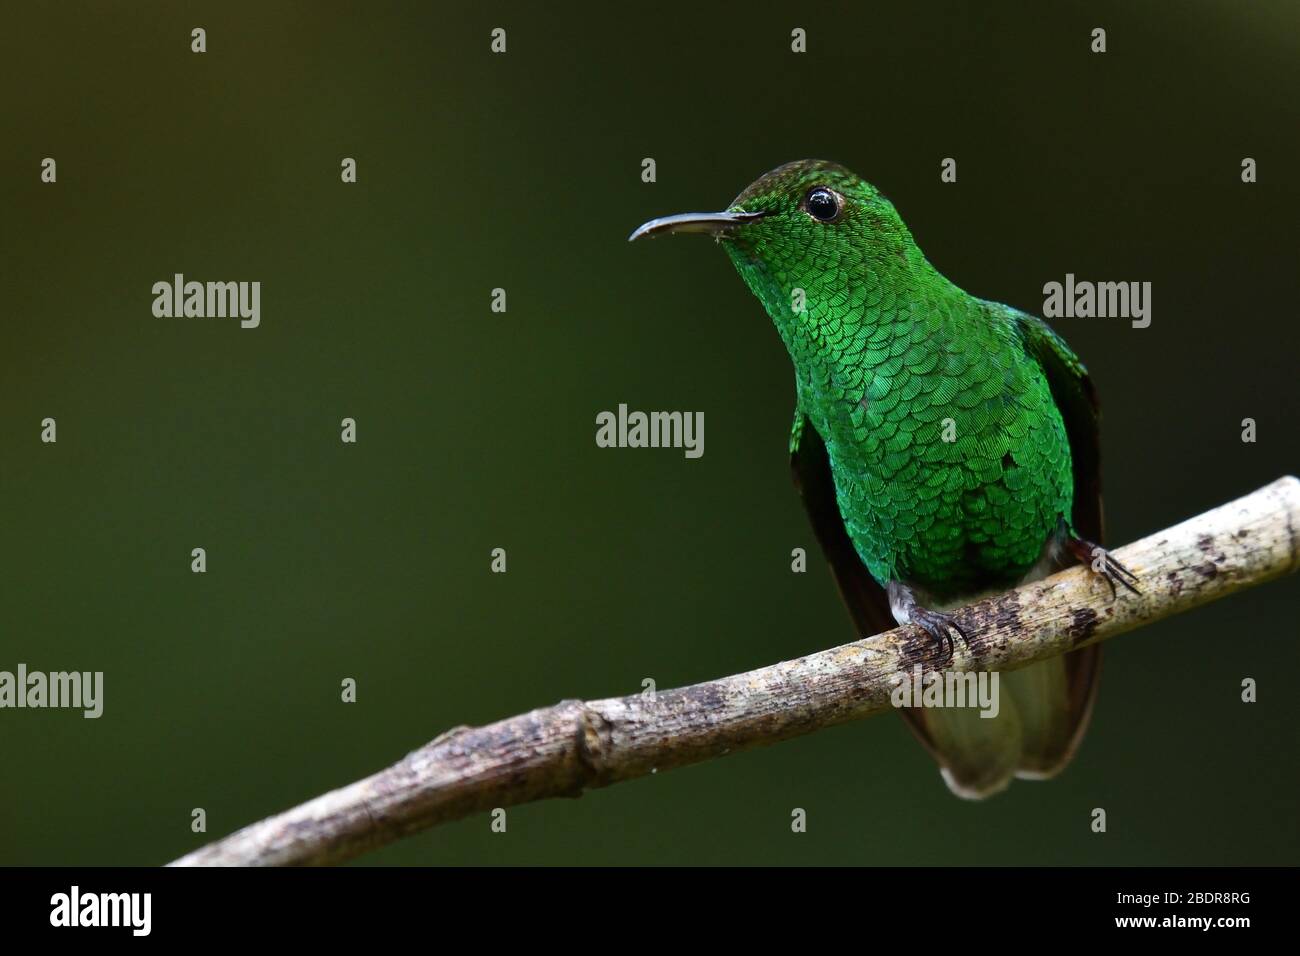 Stripe-tailed Hummingbird in Costa Rica cloud forest Stock Photo